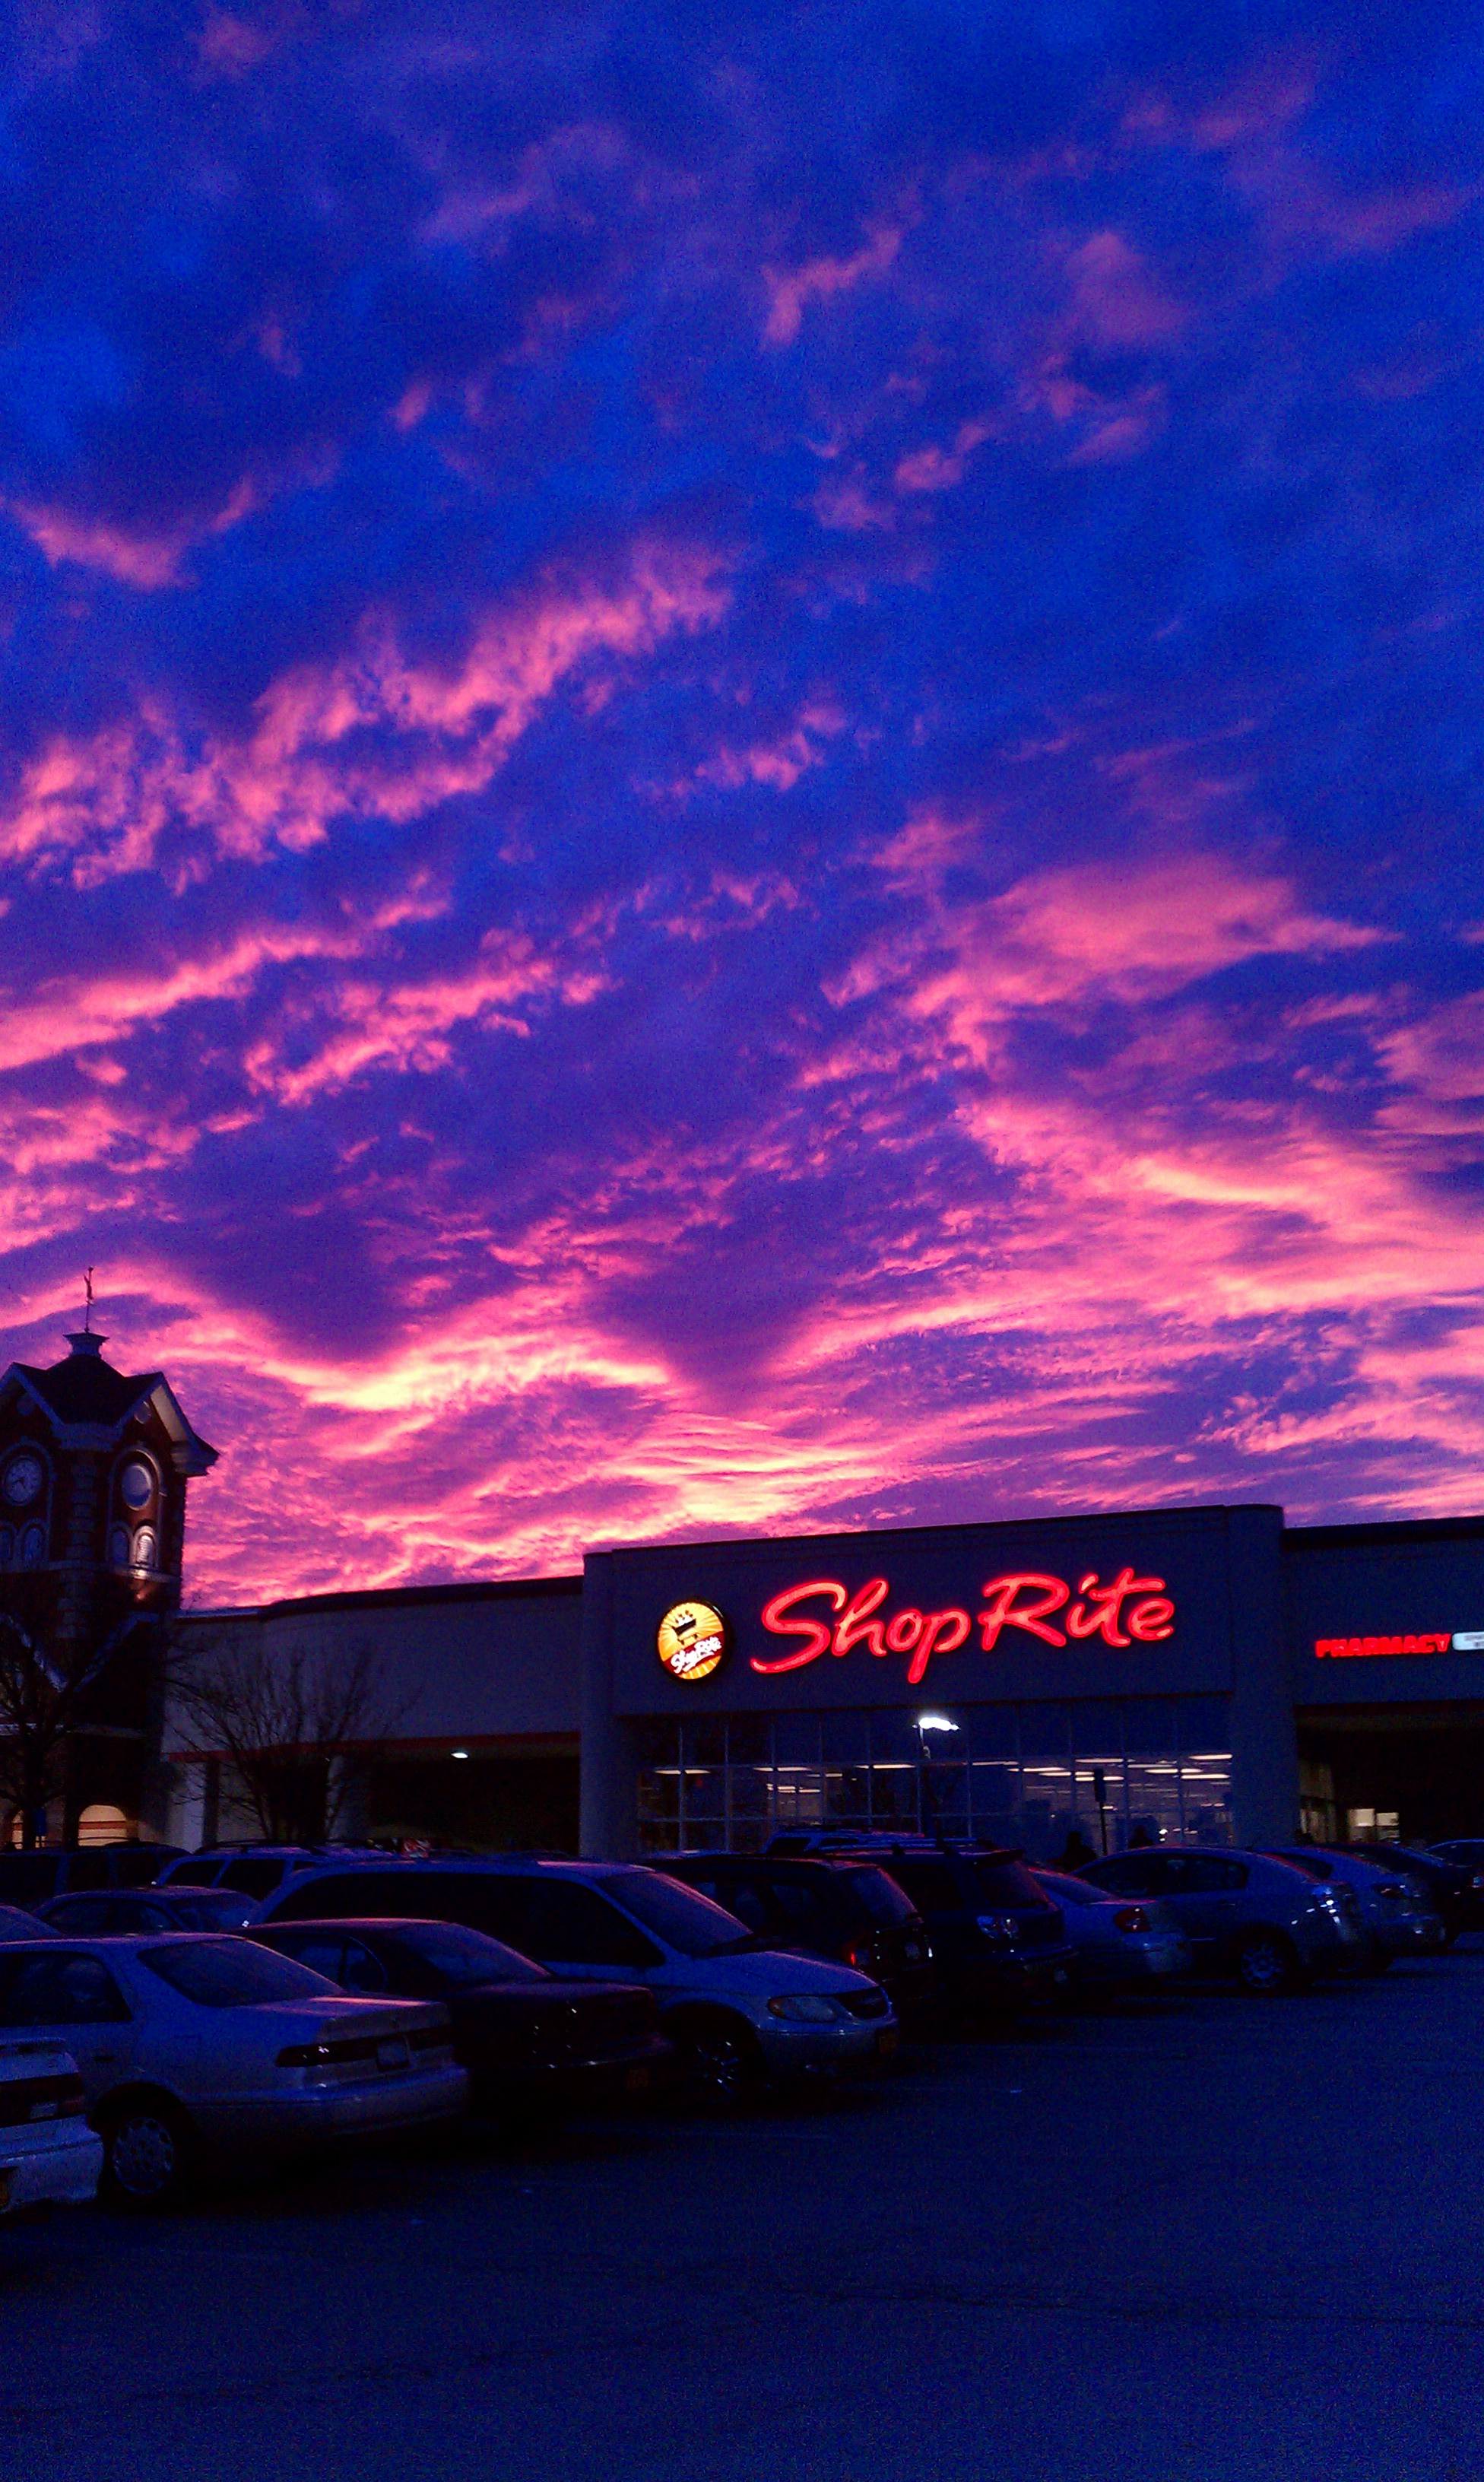 I was leaving the supermarket last night,  thought the sky looked awesome enough to take a picture of. 

This photo is 100 percent UNEDITED.

Taken with HTC EVO. 